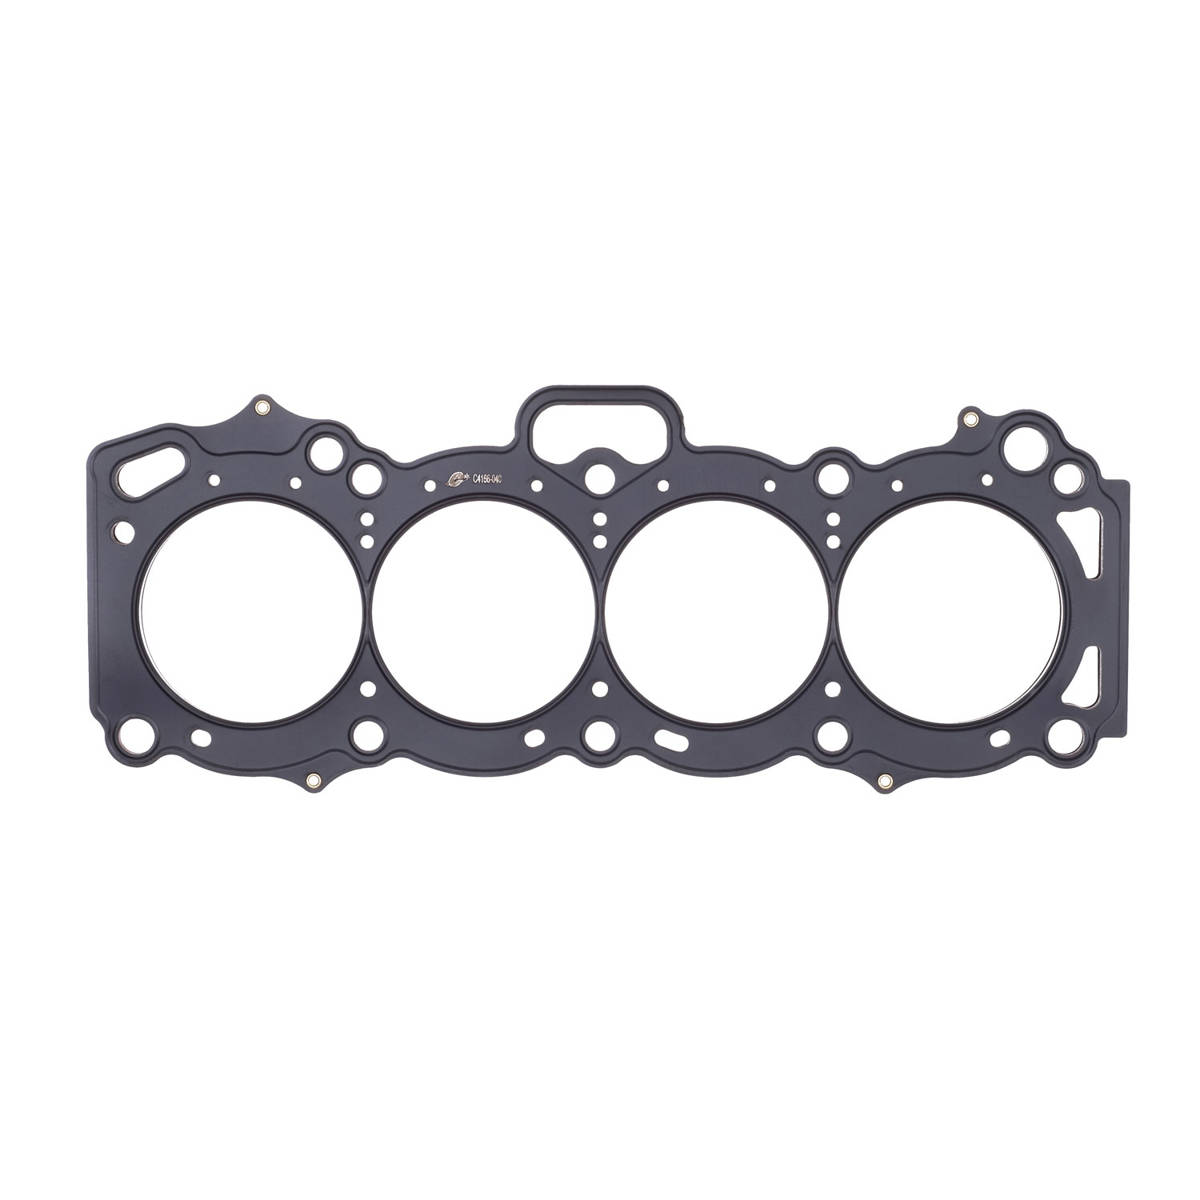 Cylinder Head Gasket Toyota 4A-GE/4A-GEZ .092" MLS , 83mm Bore, 16-Valve Cometic C4166-092